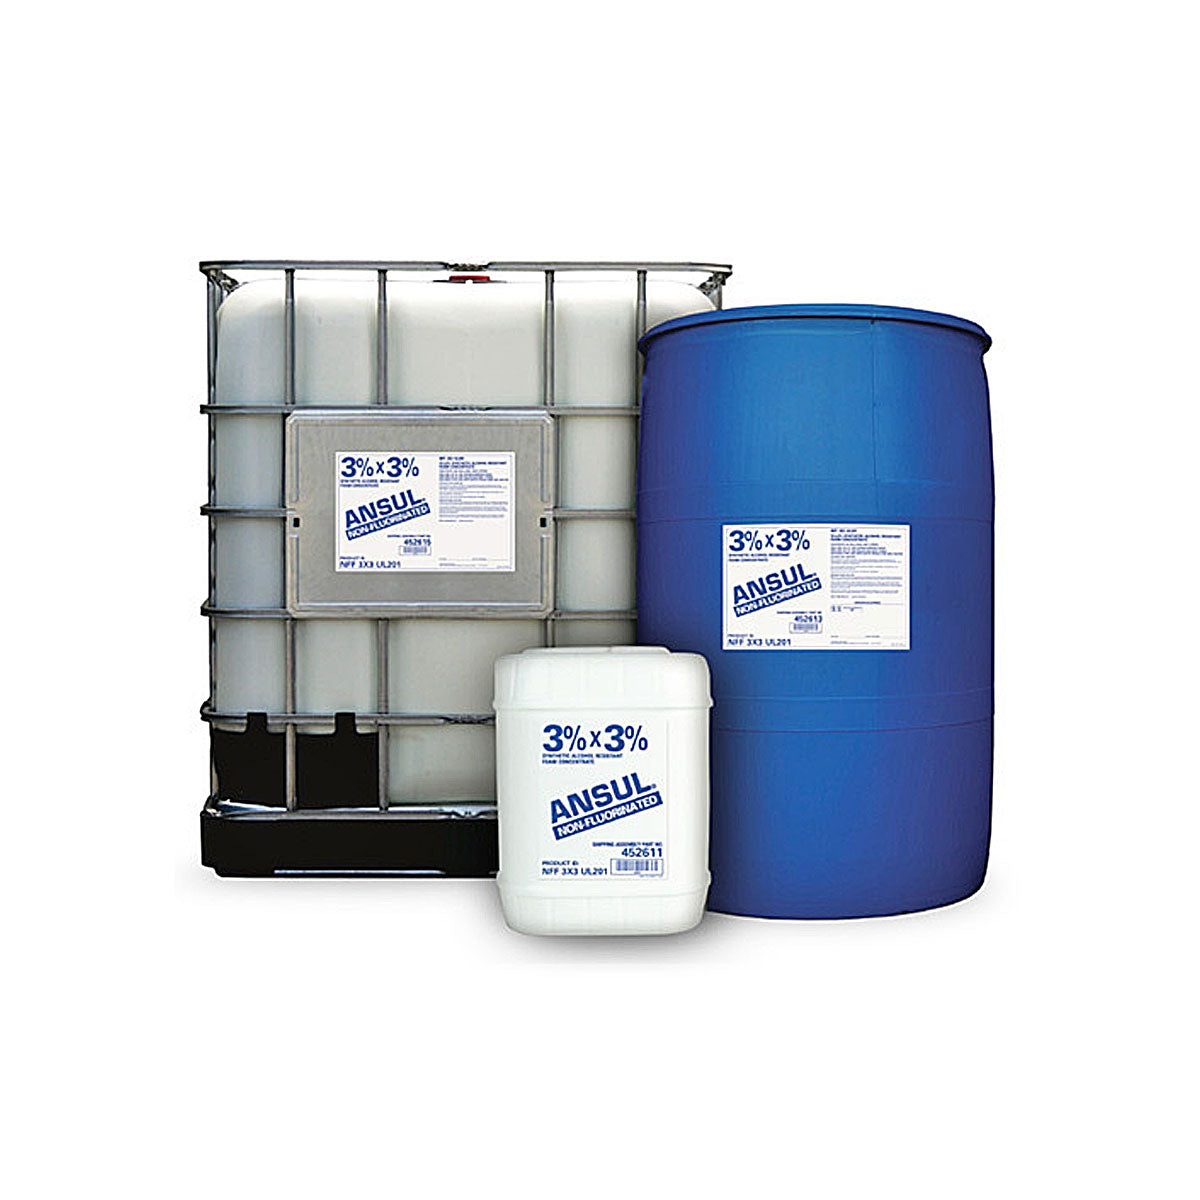 Foam Concentrate, NFF 3x3 UL201, 3% x 3%, Synthetic Alcohol Resistant, Non-Fluorinated (Fluorine Free), UL Listed (UL162), 55 Gallon Drum (208 liters)